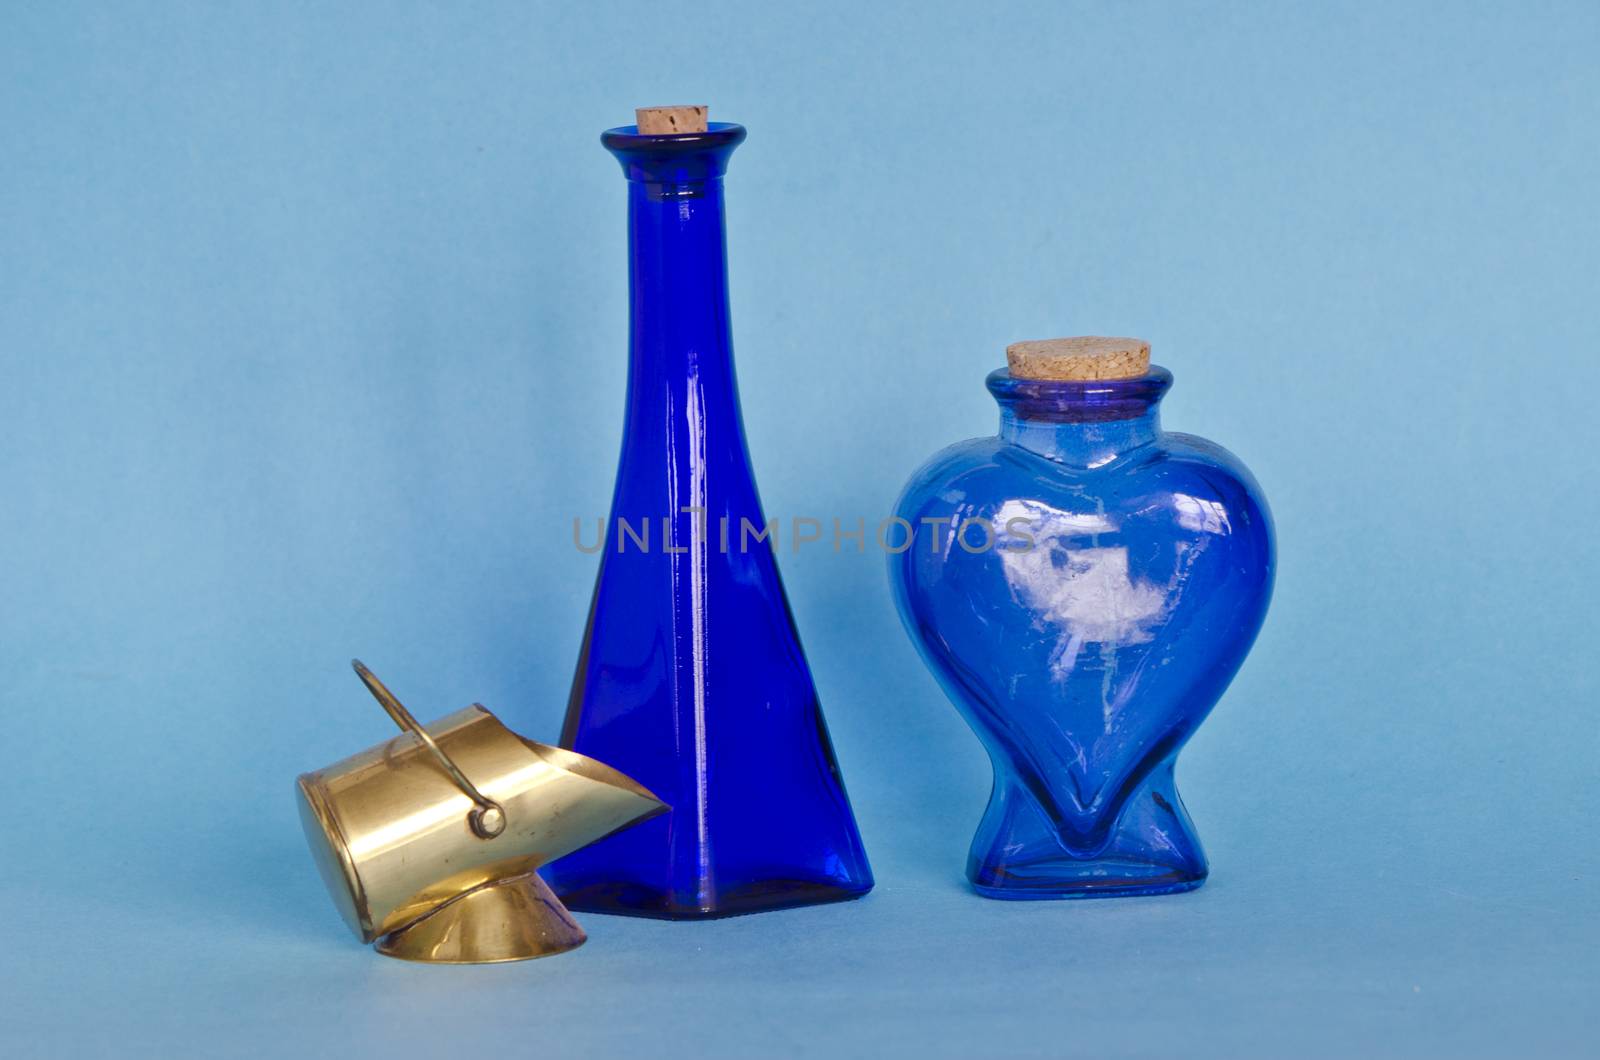 Two decorative blue glass bottles with decorative brass object on blue background